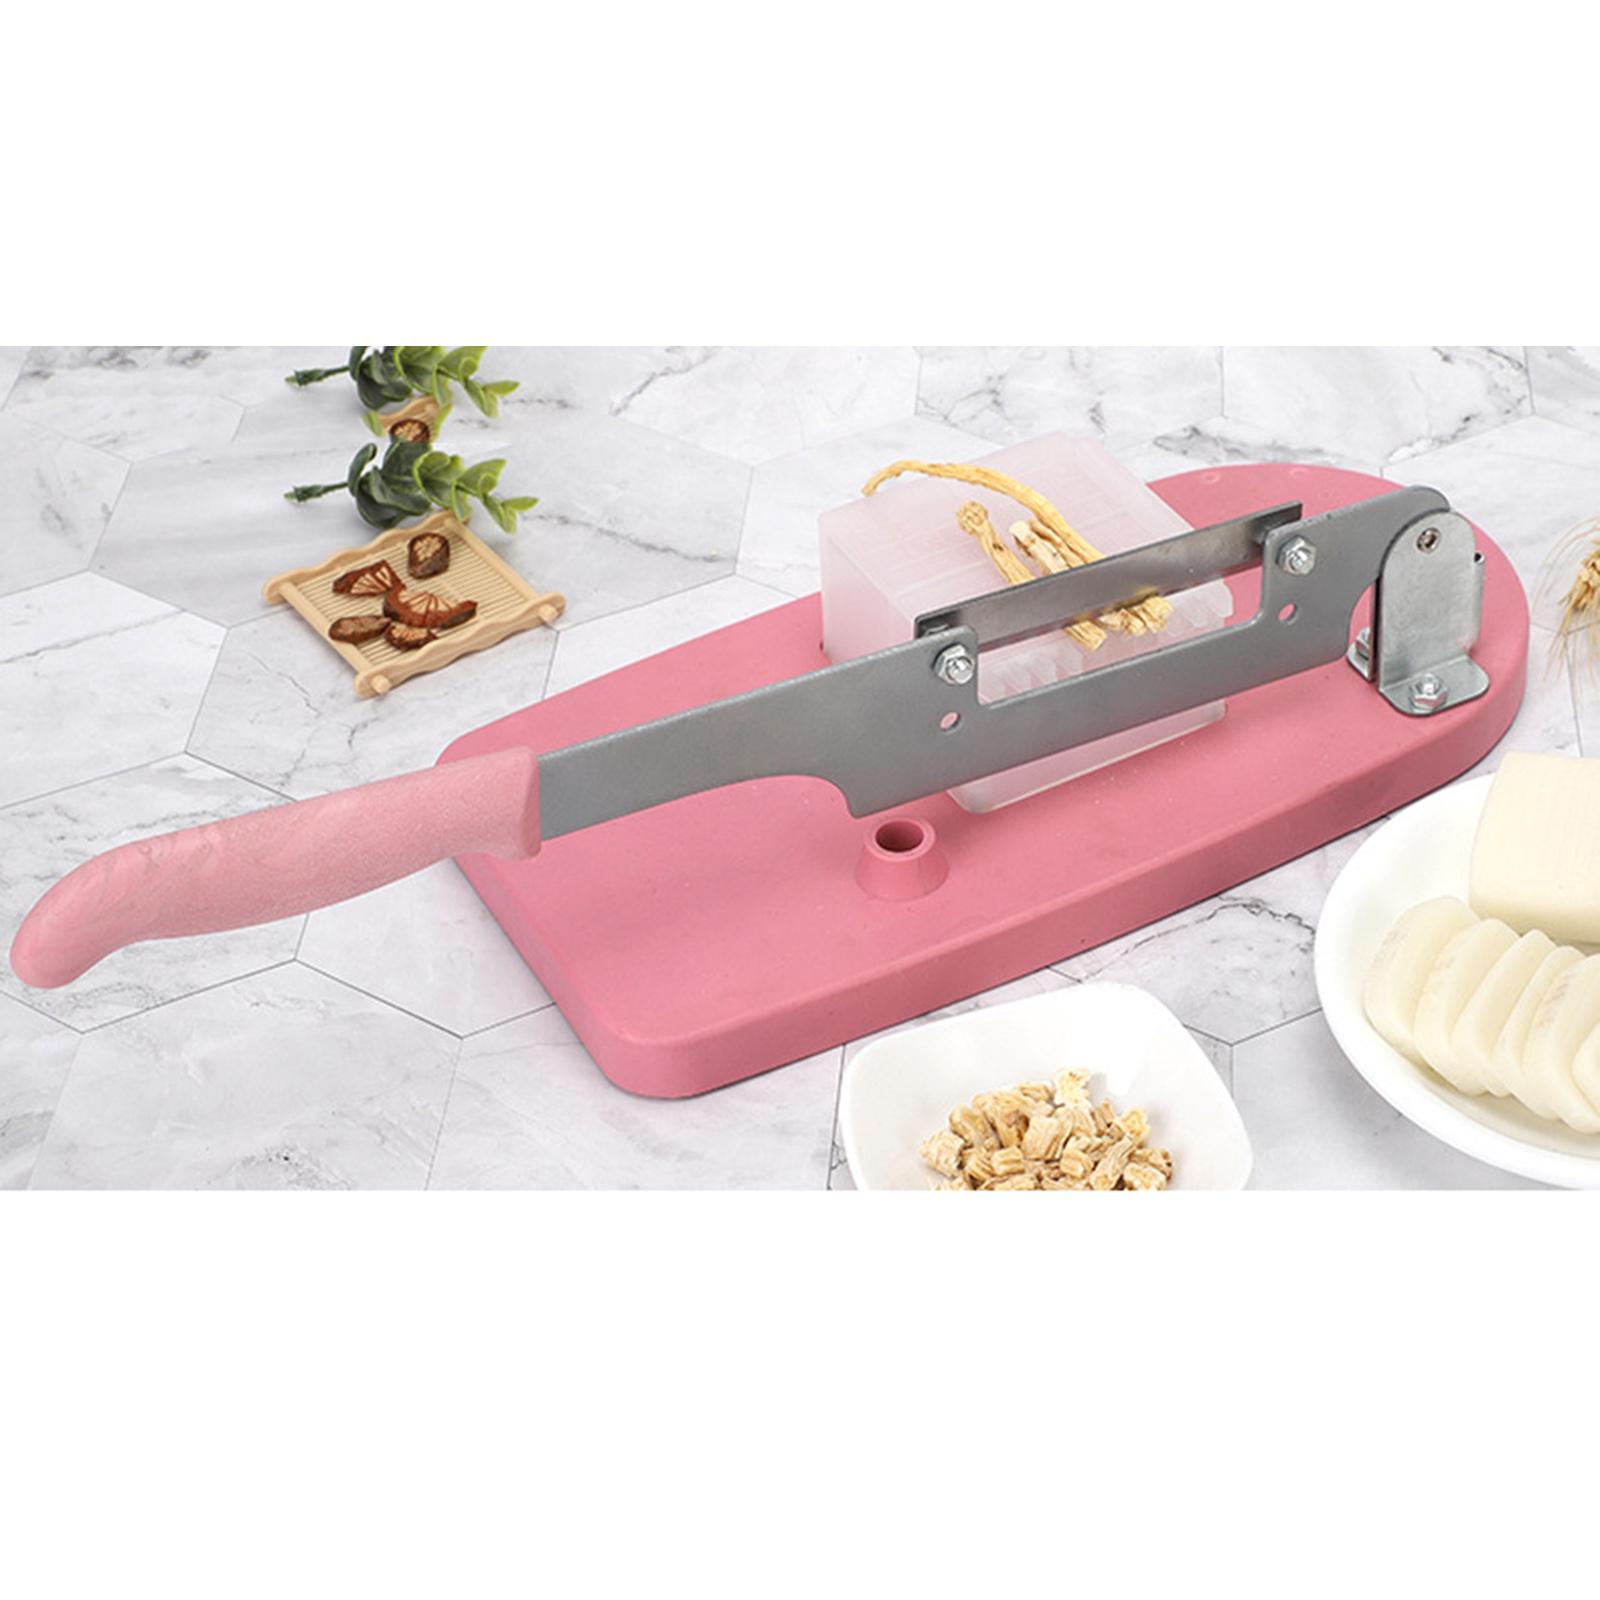 Home Kitchen Multifunctional Table Slicer Food Cutter Manual Cutting Machine for Rice Cakes